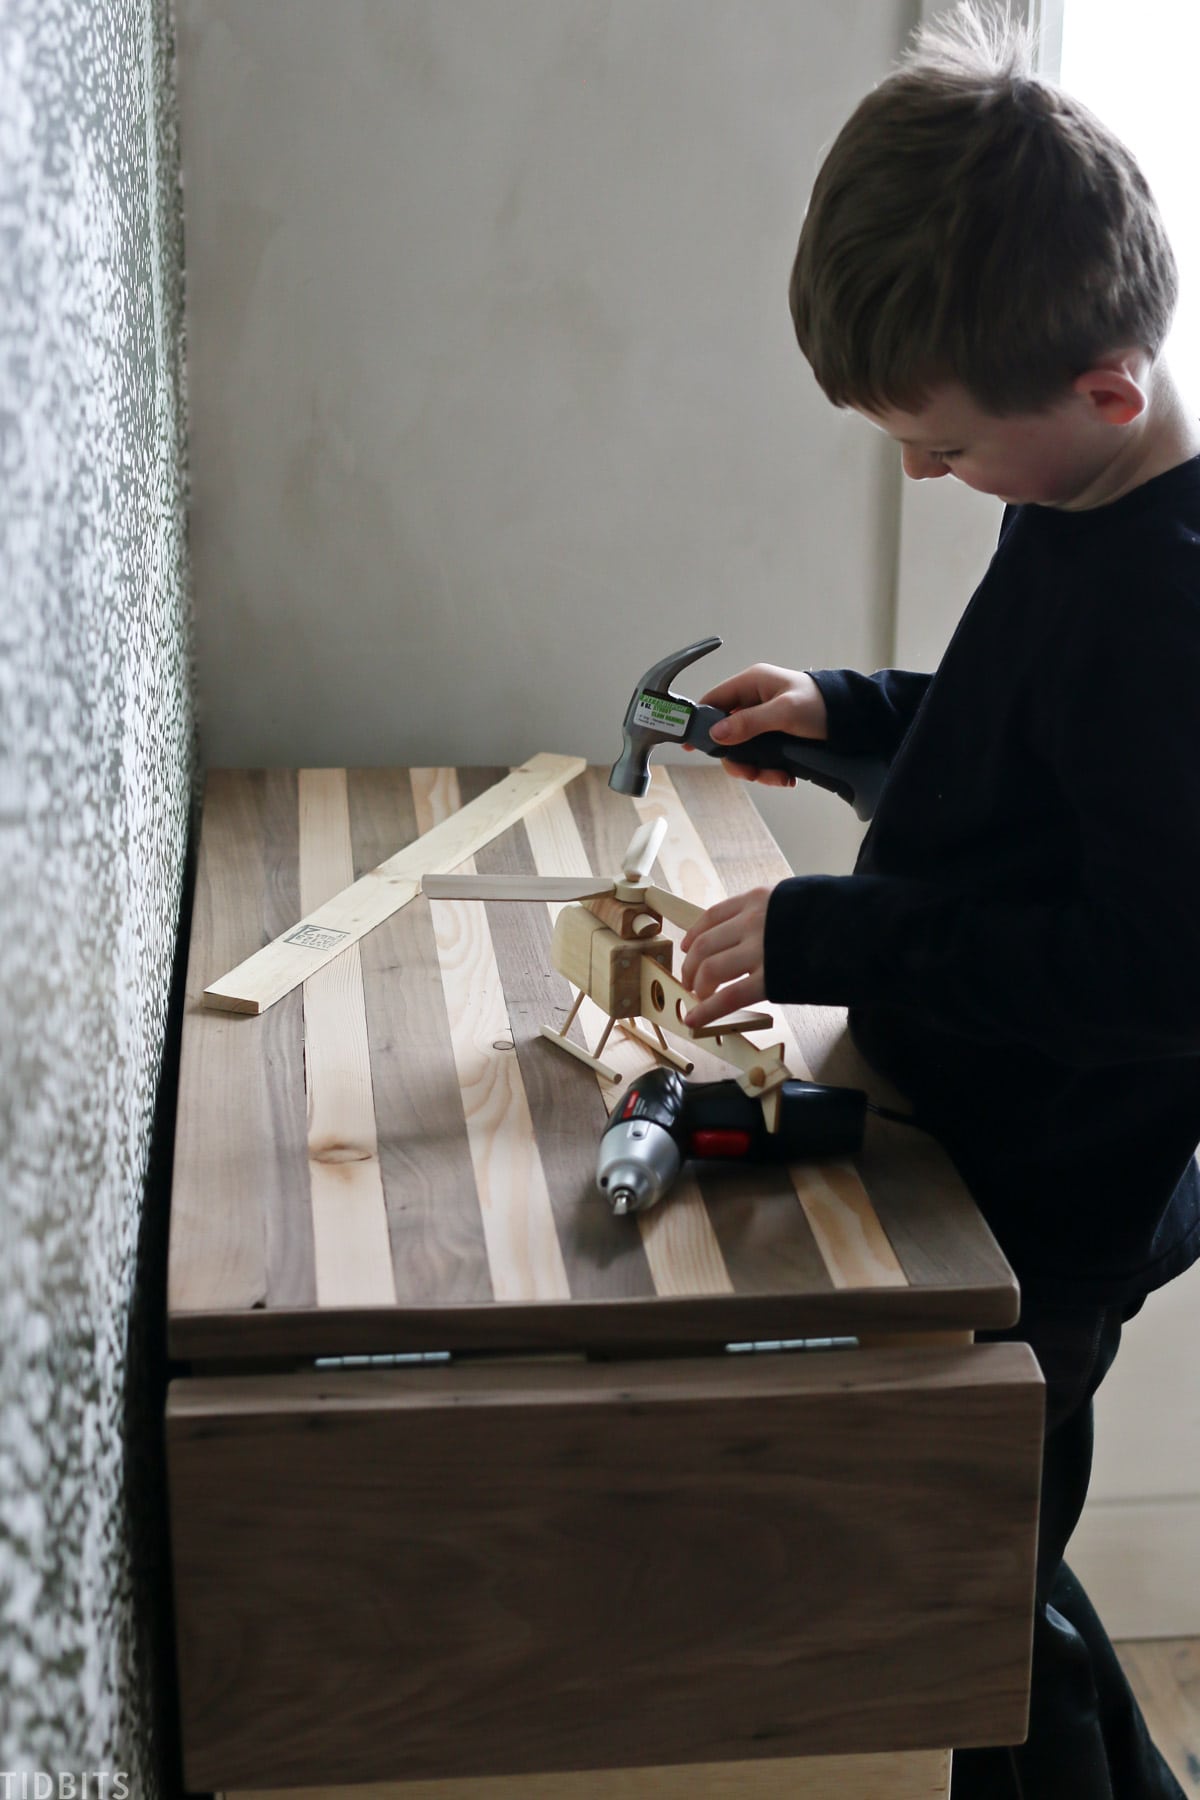 Little boy building on his own workbench